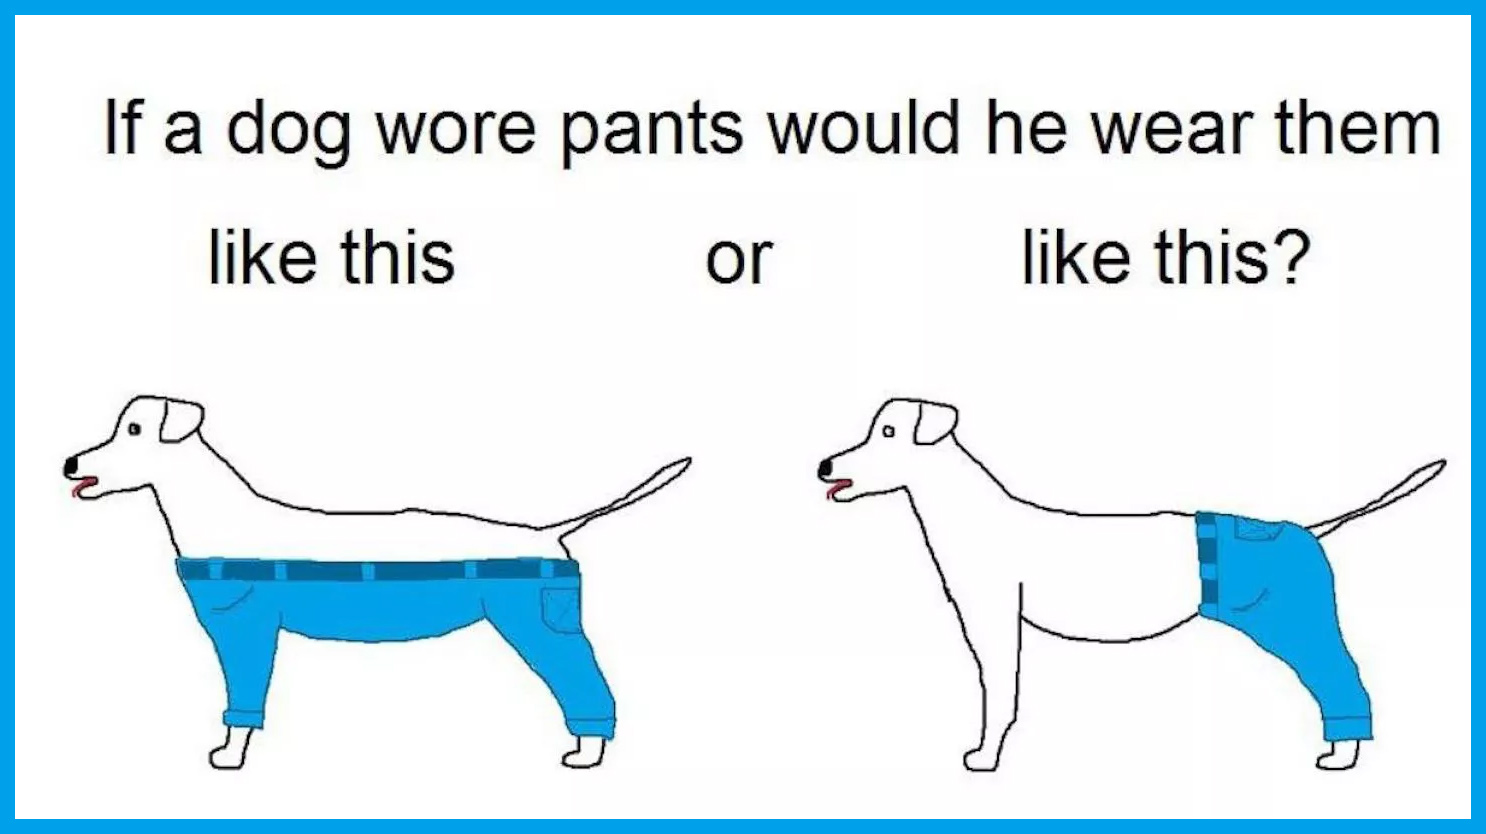 A Diagram of Two Possible Ways Dogs Could Wear Pants